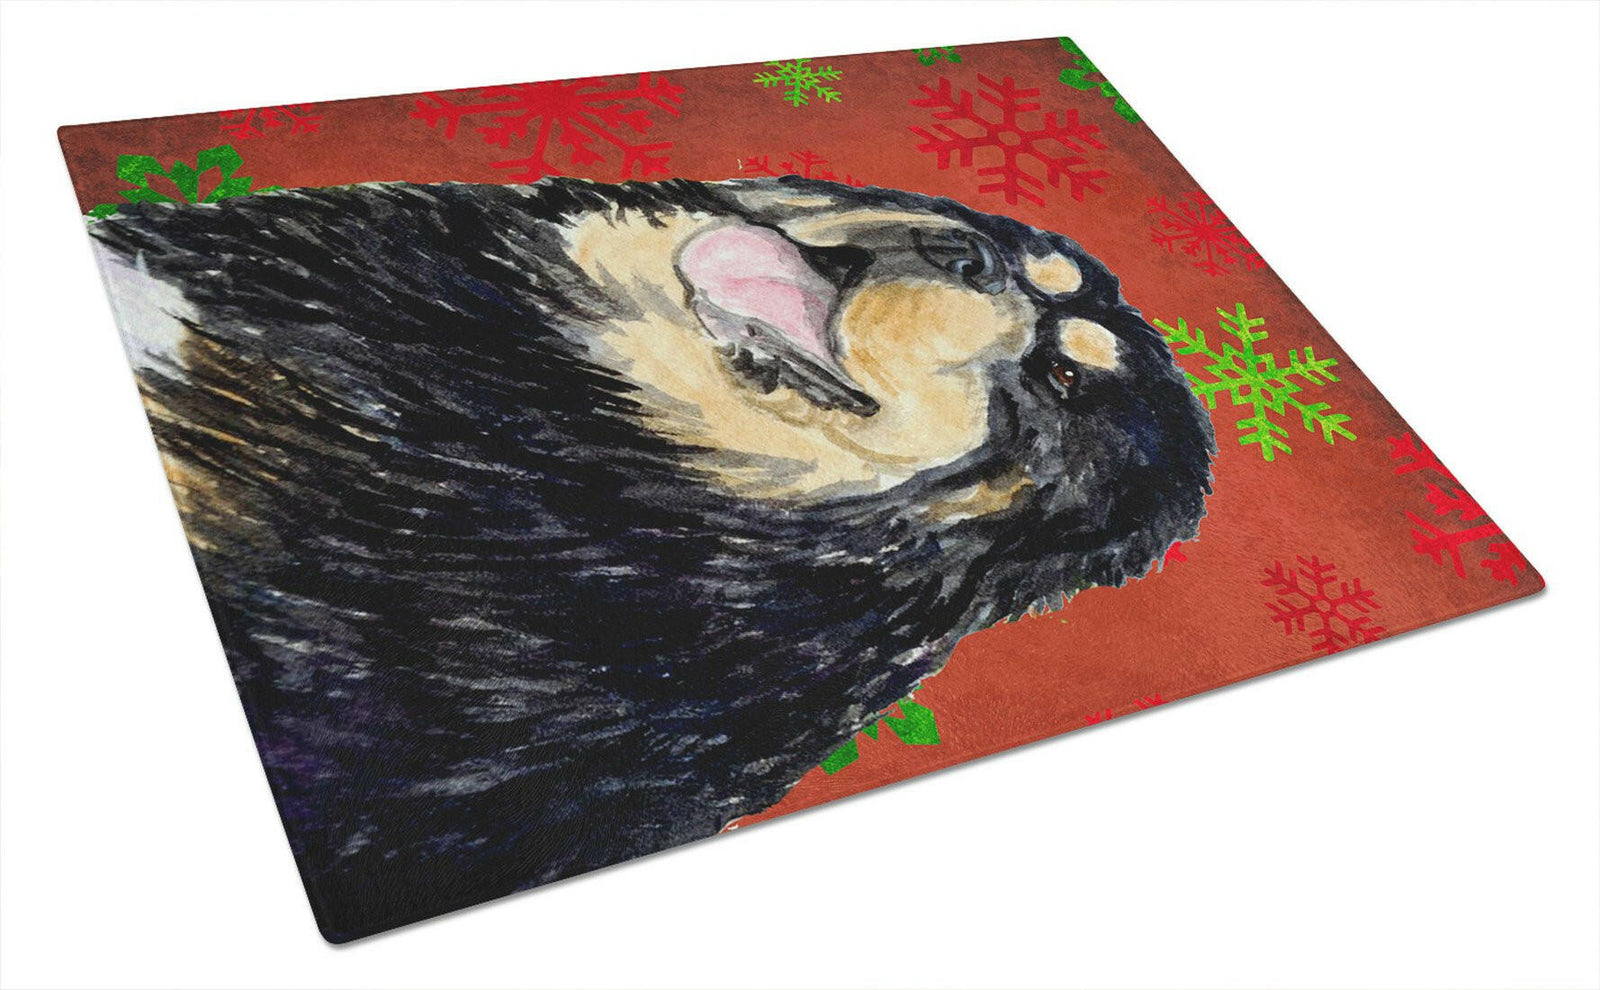 Tibetan Mastiff Red and Green Snowflakes Christmas Glass Cutting Board Large by Caroline's Treasures